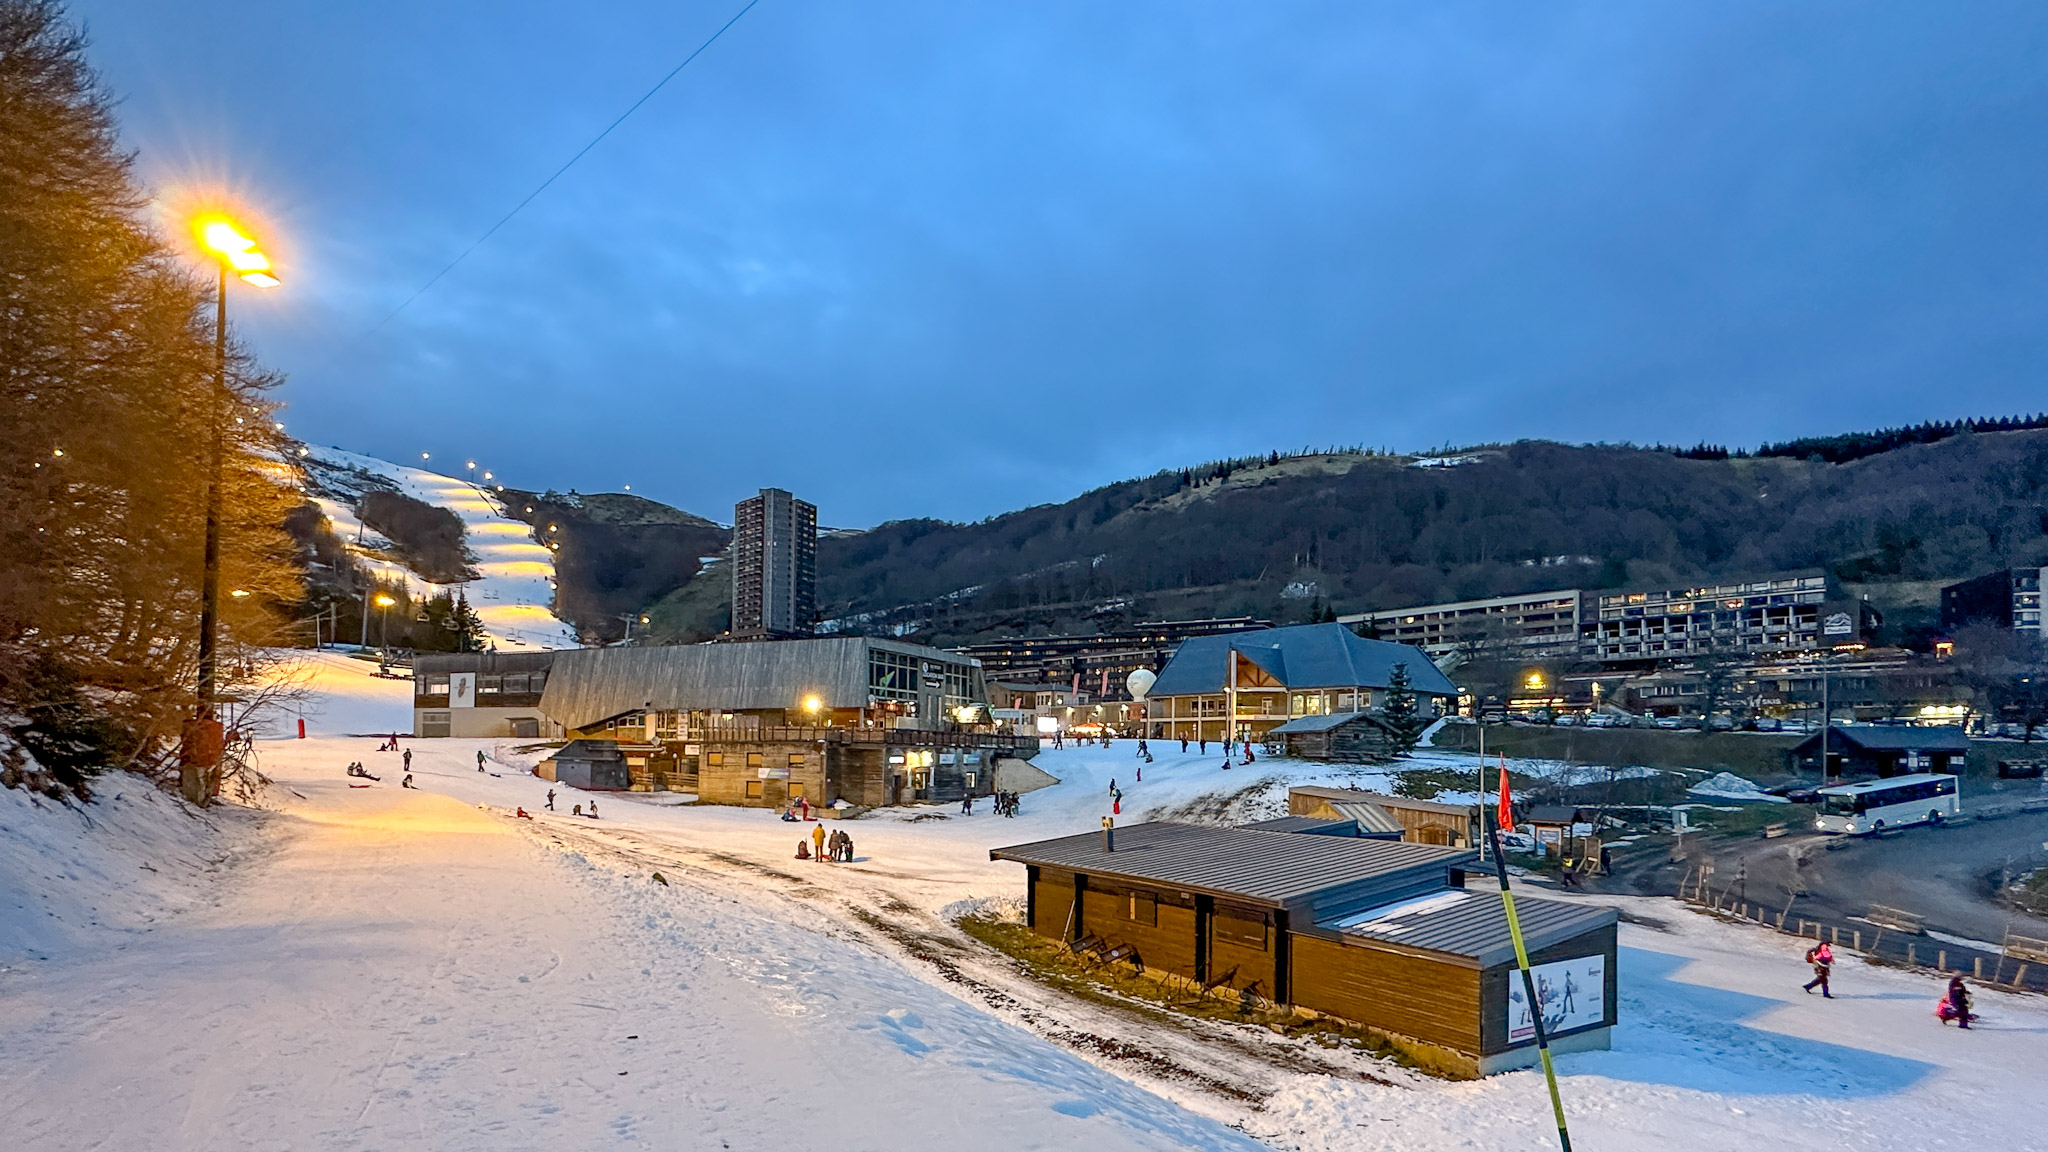 Super Besse, the ESF of Super Besse and the center of the resort of Super Besse